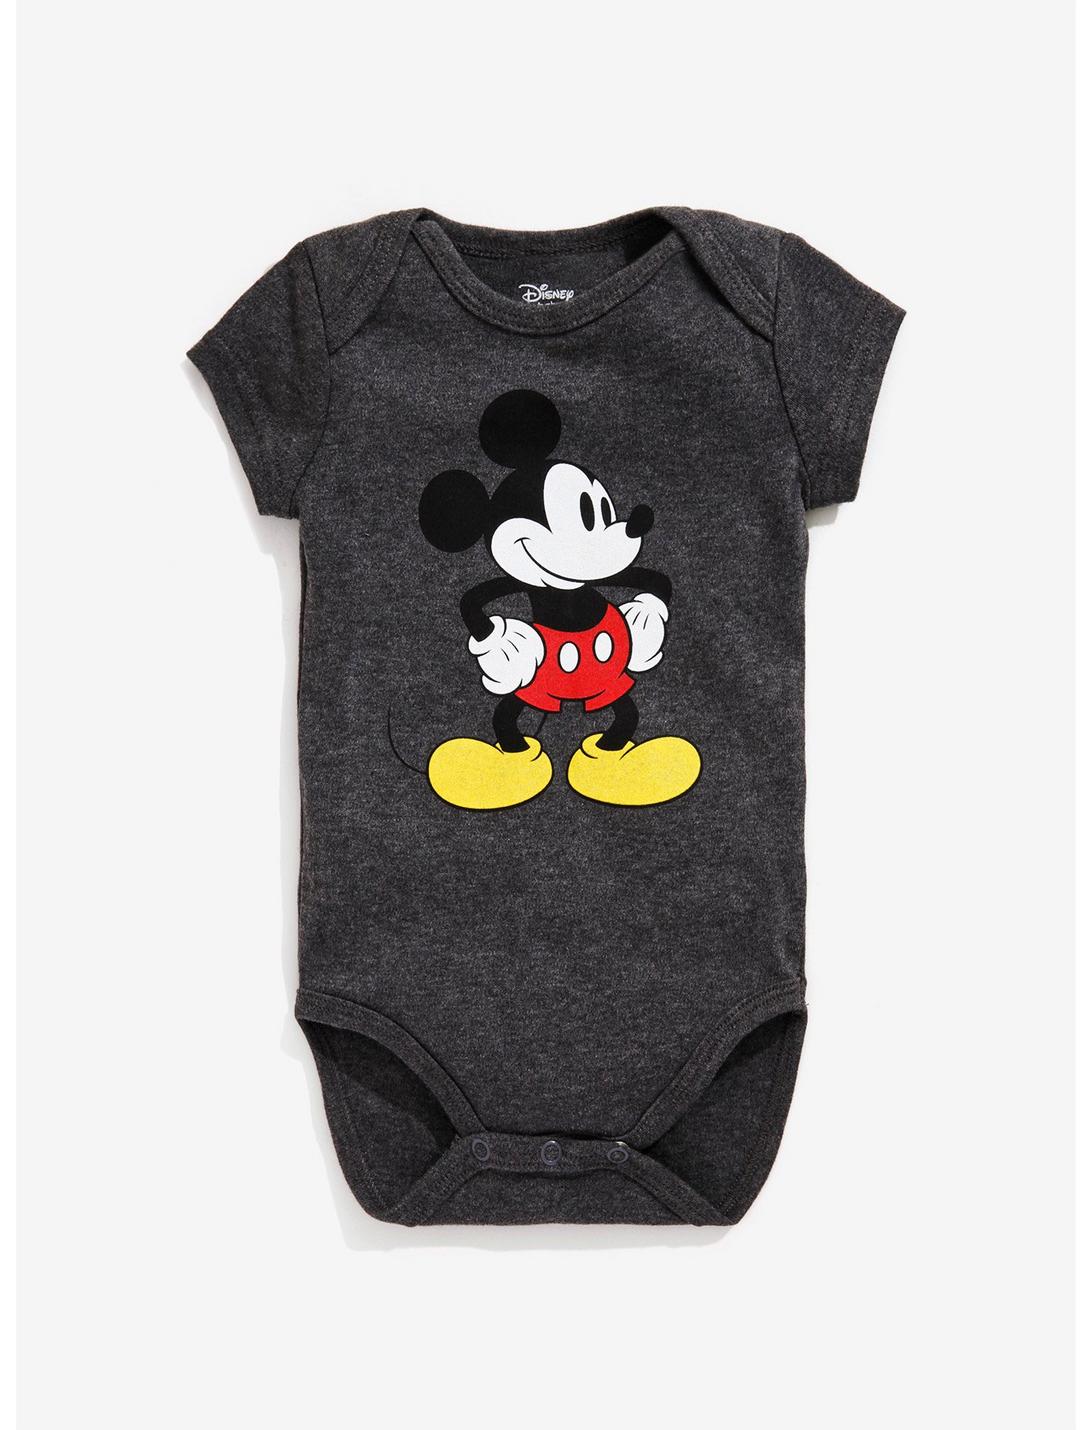 Disney Mickey Mouse Classic Pose Baby Bodysuit, CHARCOAL, hi-res